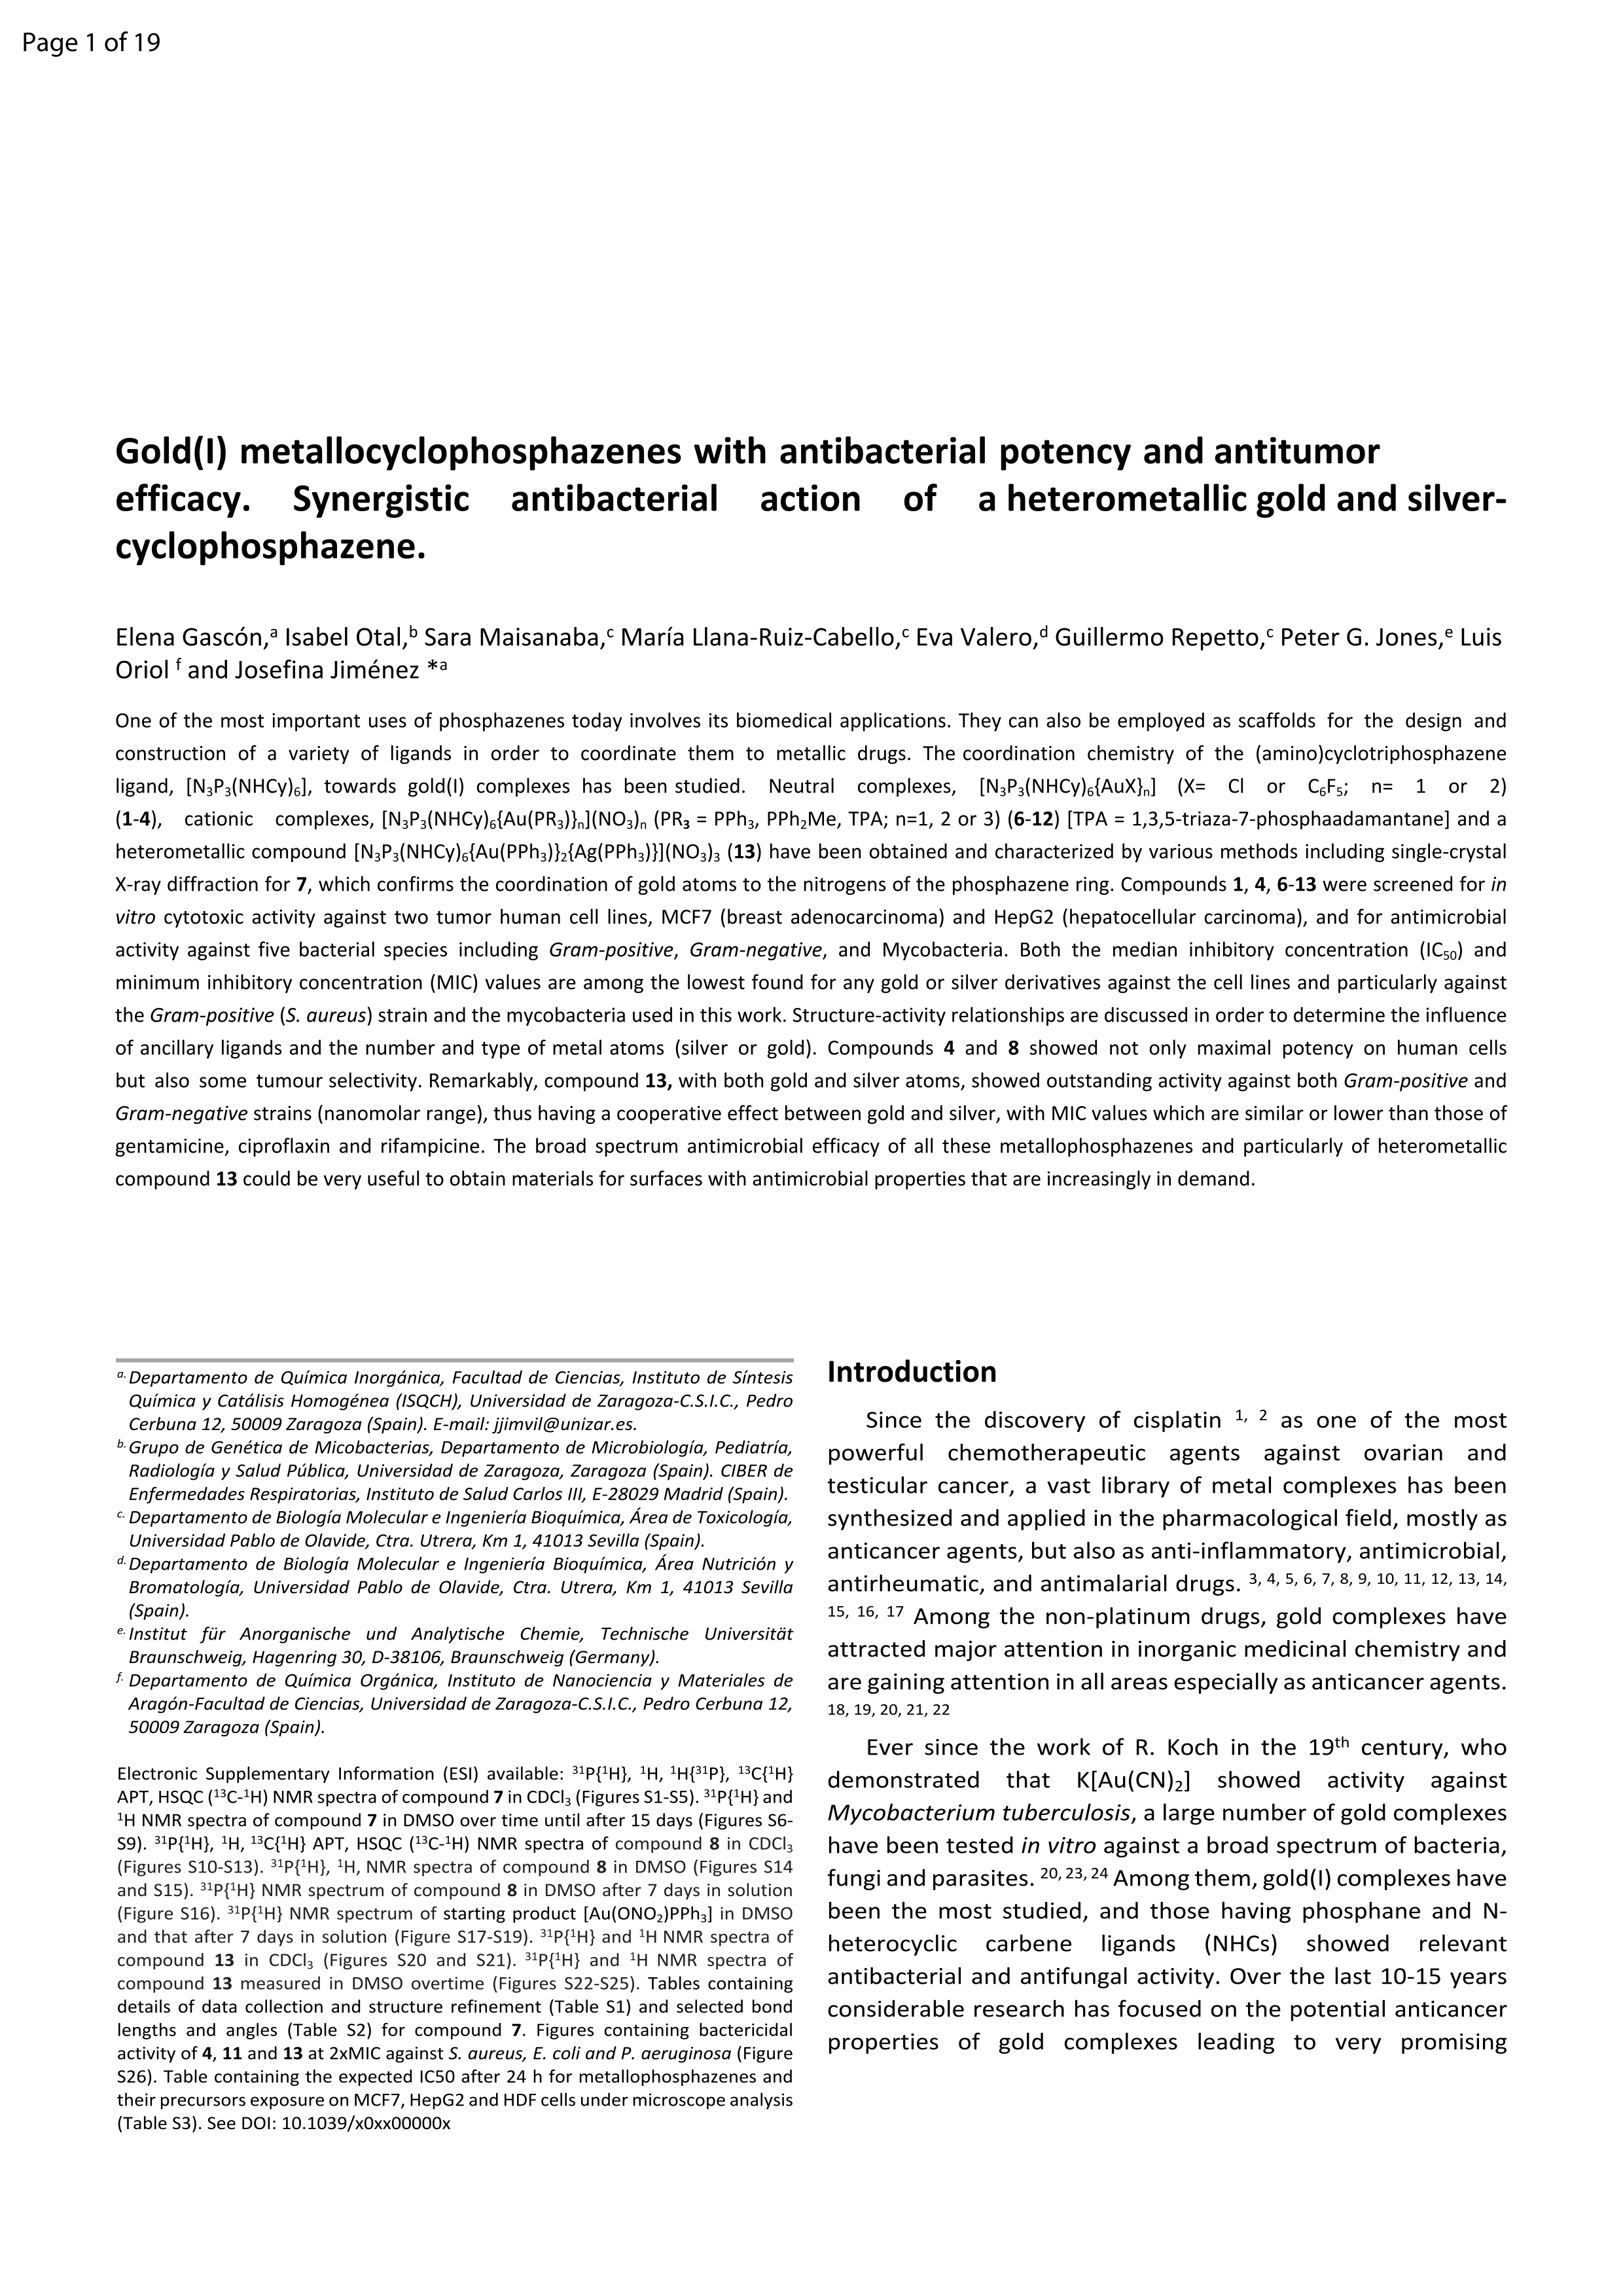 Gold(I) metallocyclophosphazenes with antibacterial potency and antitumor efficacy. Synergistic antibacterial action of a heterometallic gold and silver-cyclophosphazene